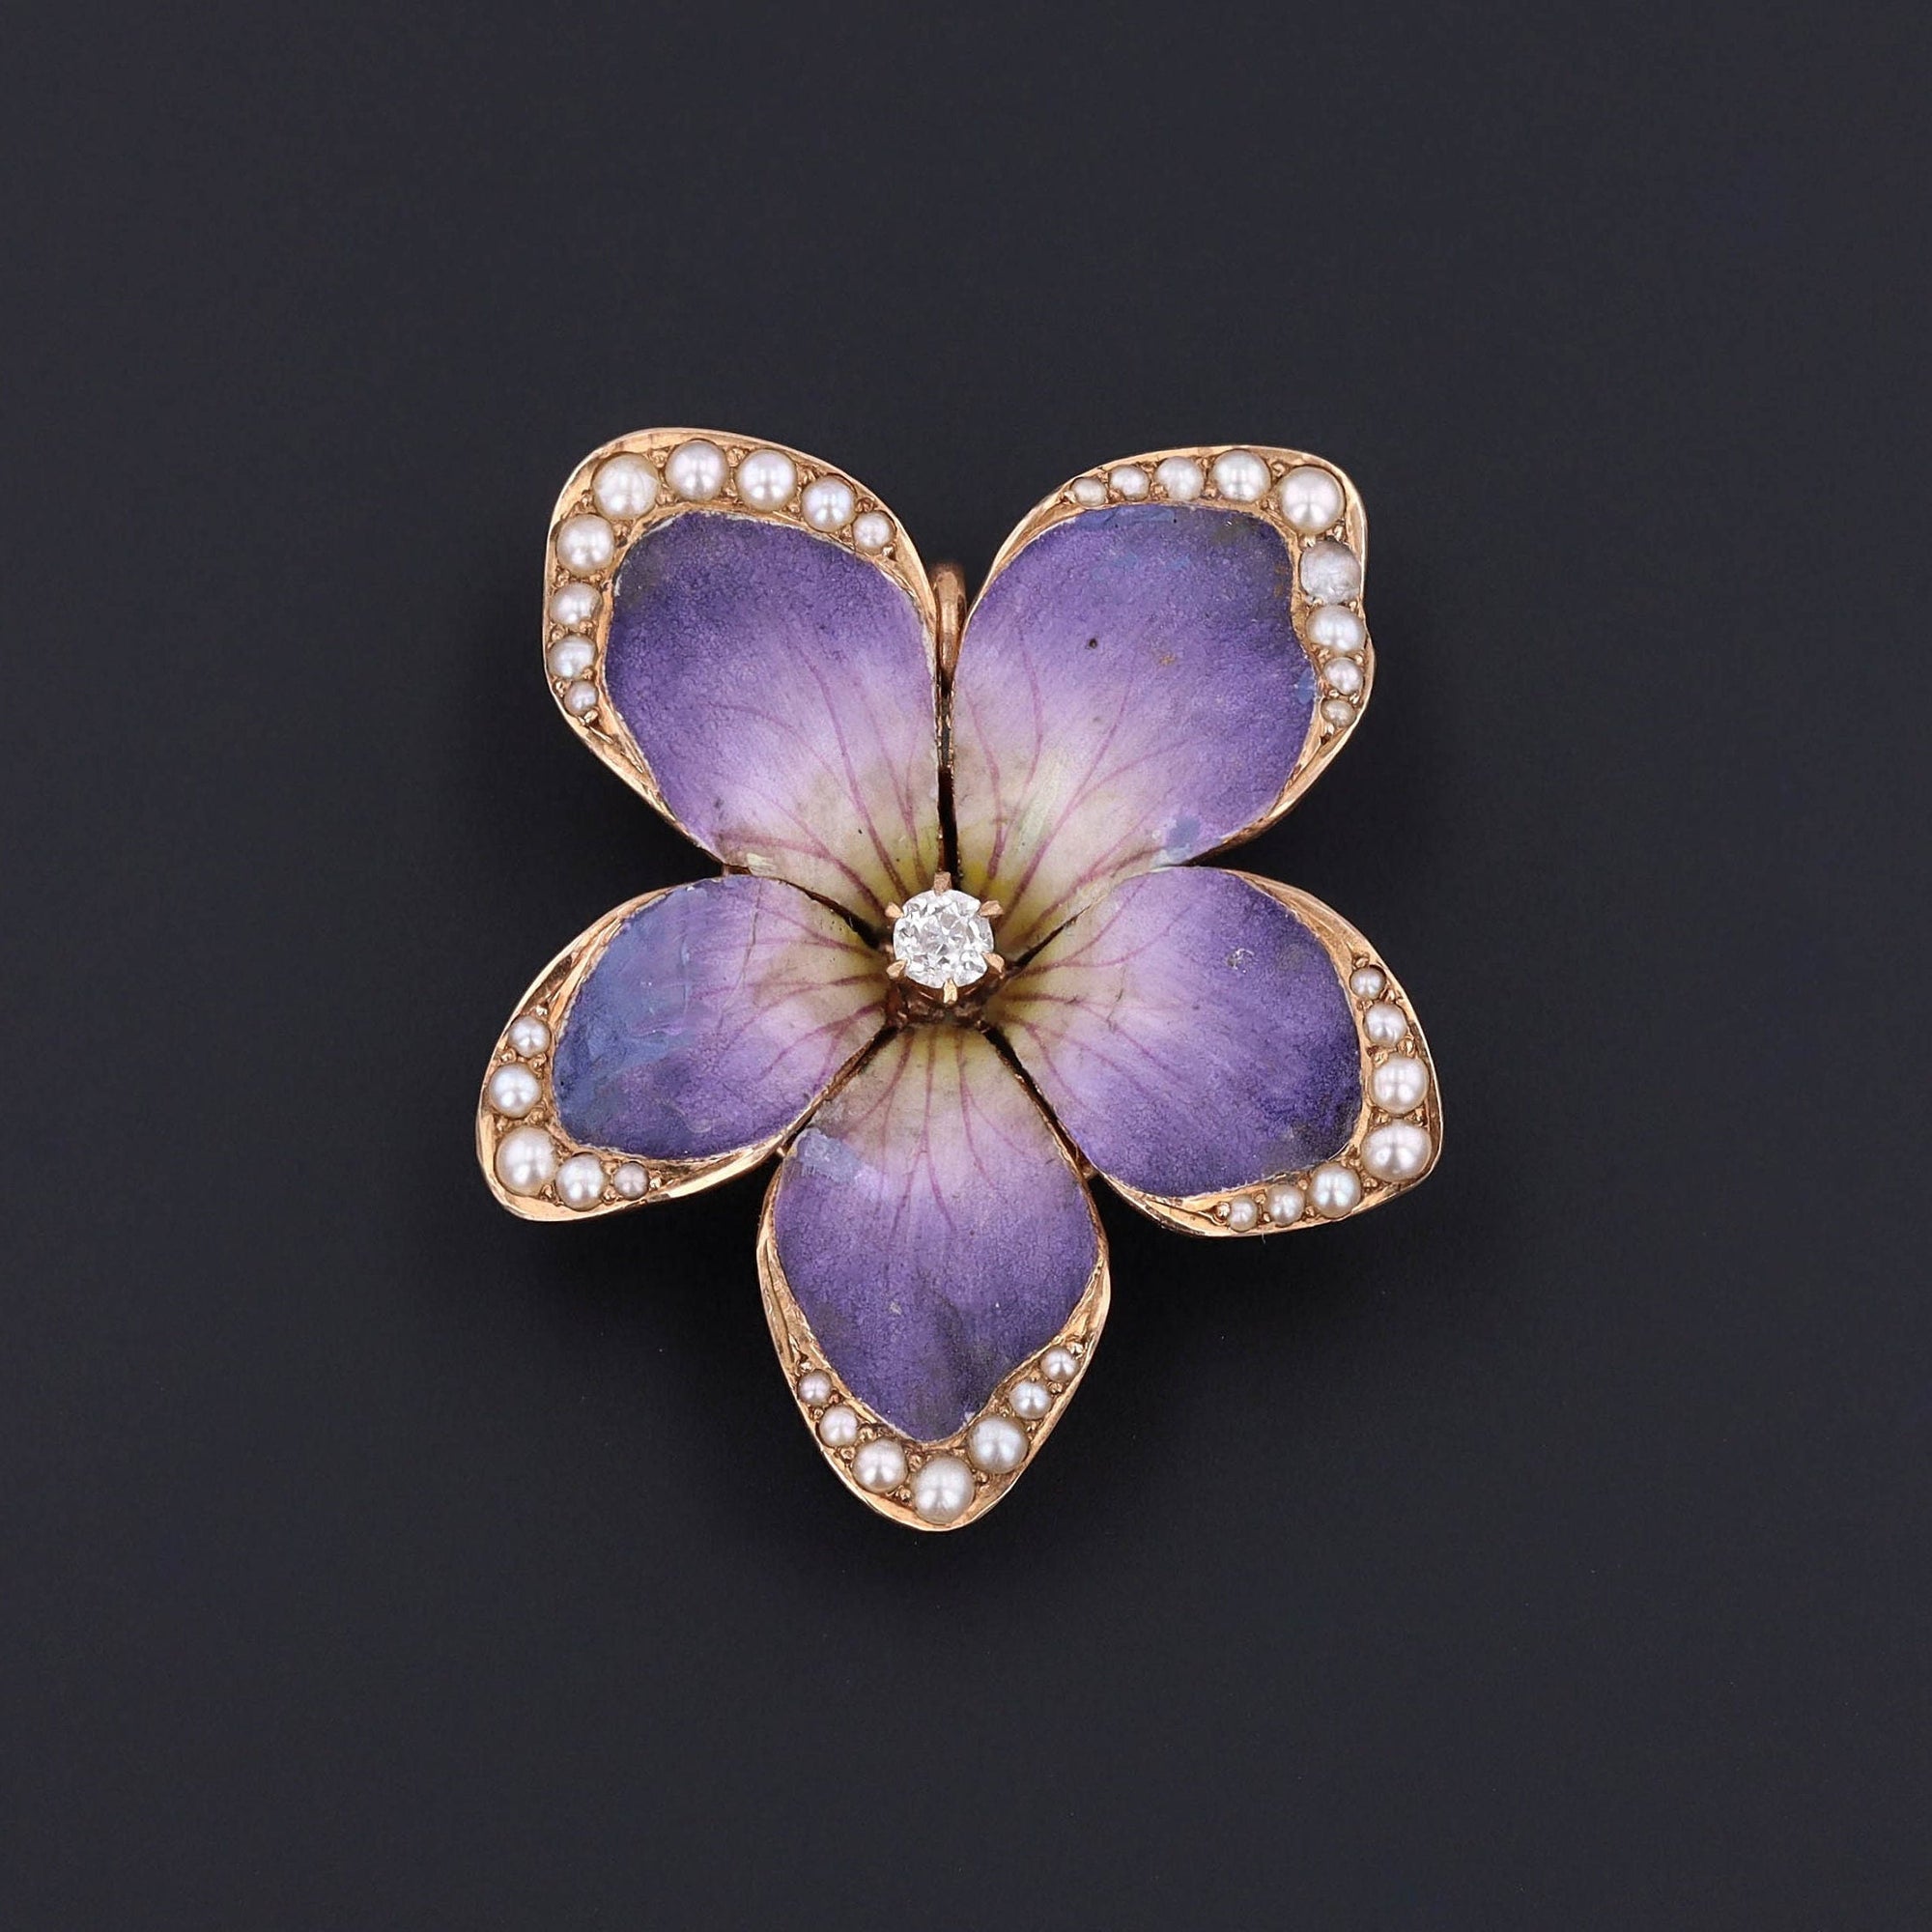 Antique Pansy Brooch and Pendant | Antique Enamel Pansy with Pearls & Diamond 